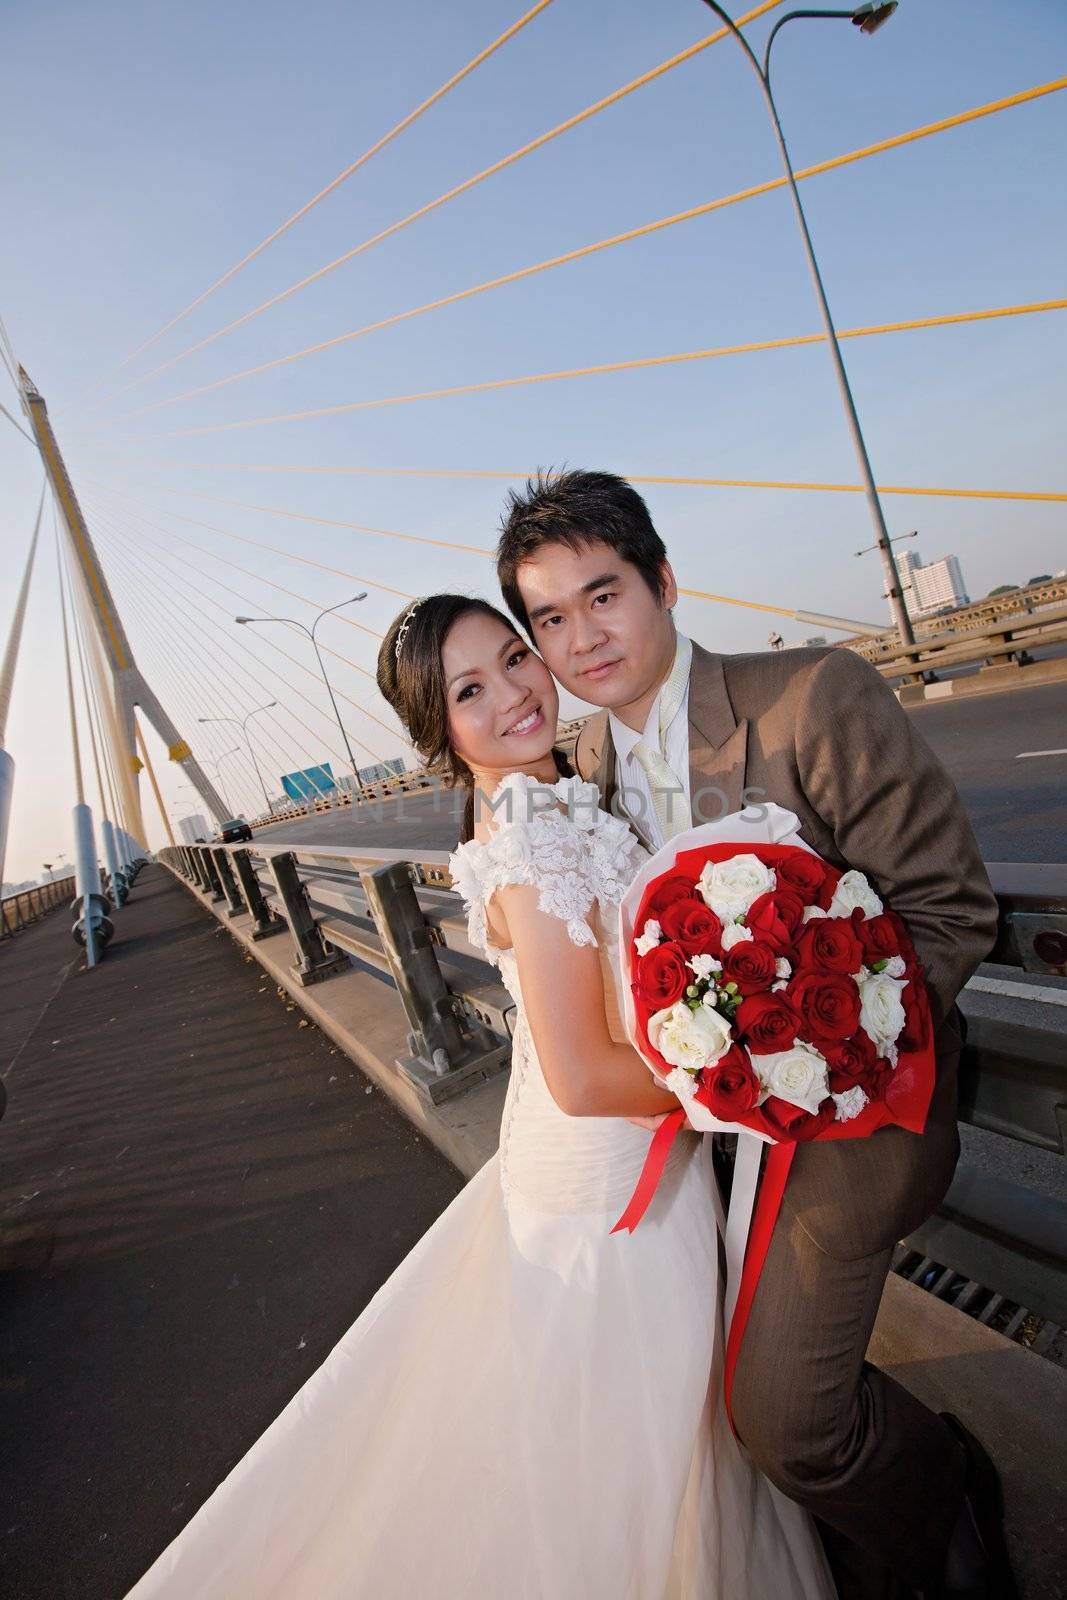 couples of happiness Bride and groom with beautiful rose bouquet on the road bridge